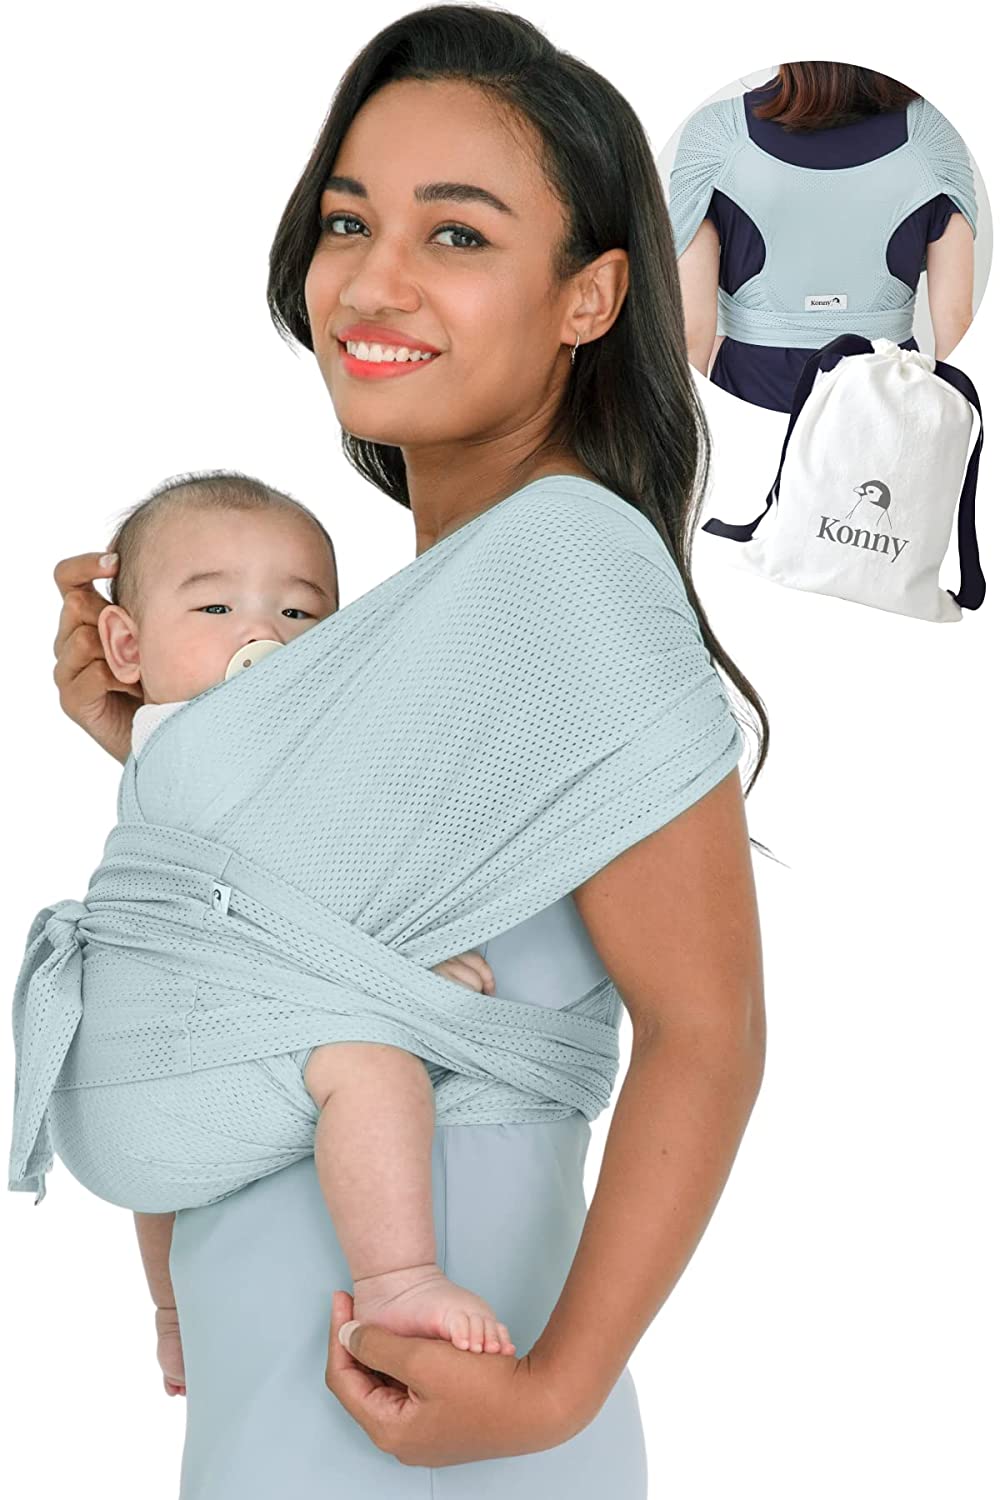 Konny Air Mesh Baby Carrier | Ultra Lightweight, Hassle-Free Baby Wrap | Newborns, Infants up to 20 kg Toddlers | Cool and Breathable Fabric | Useful Sleep Solution (Mint, 3XL)